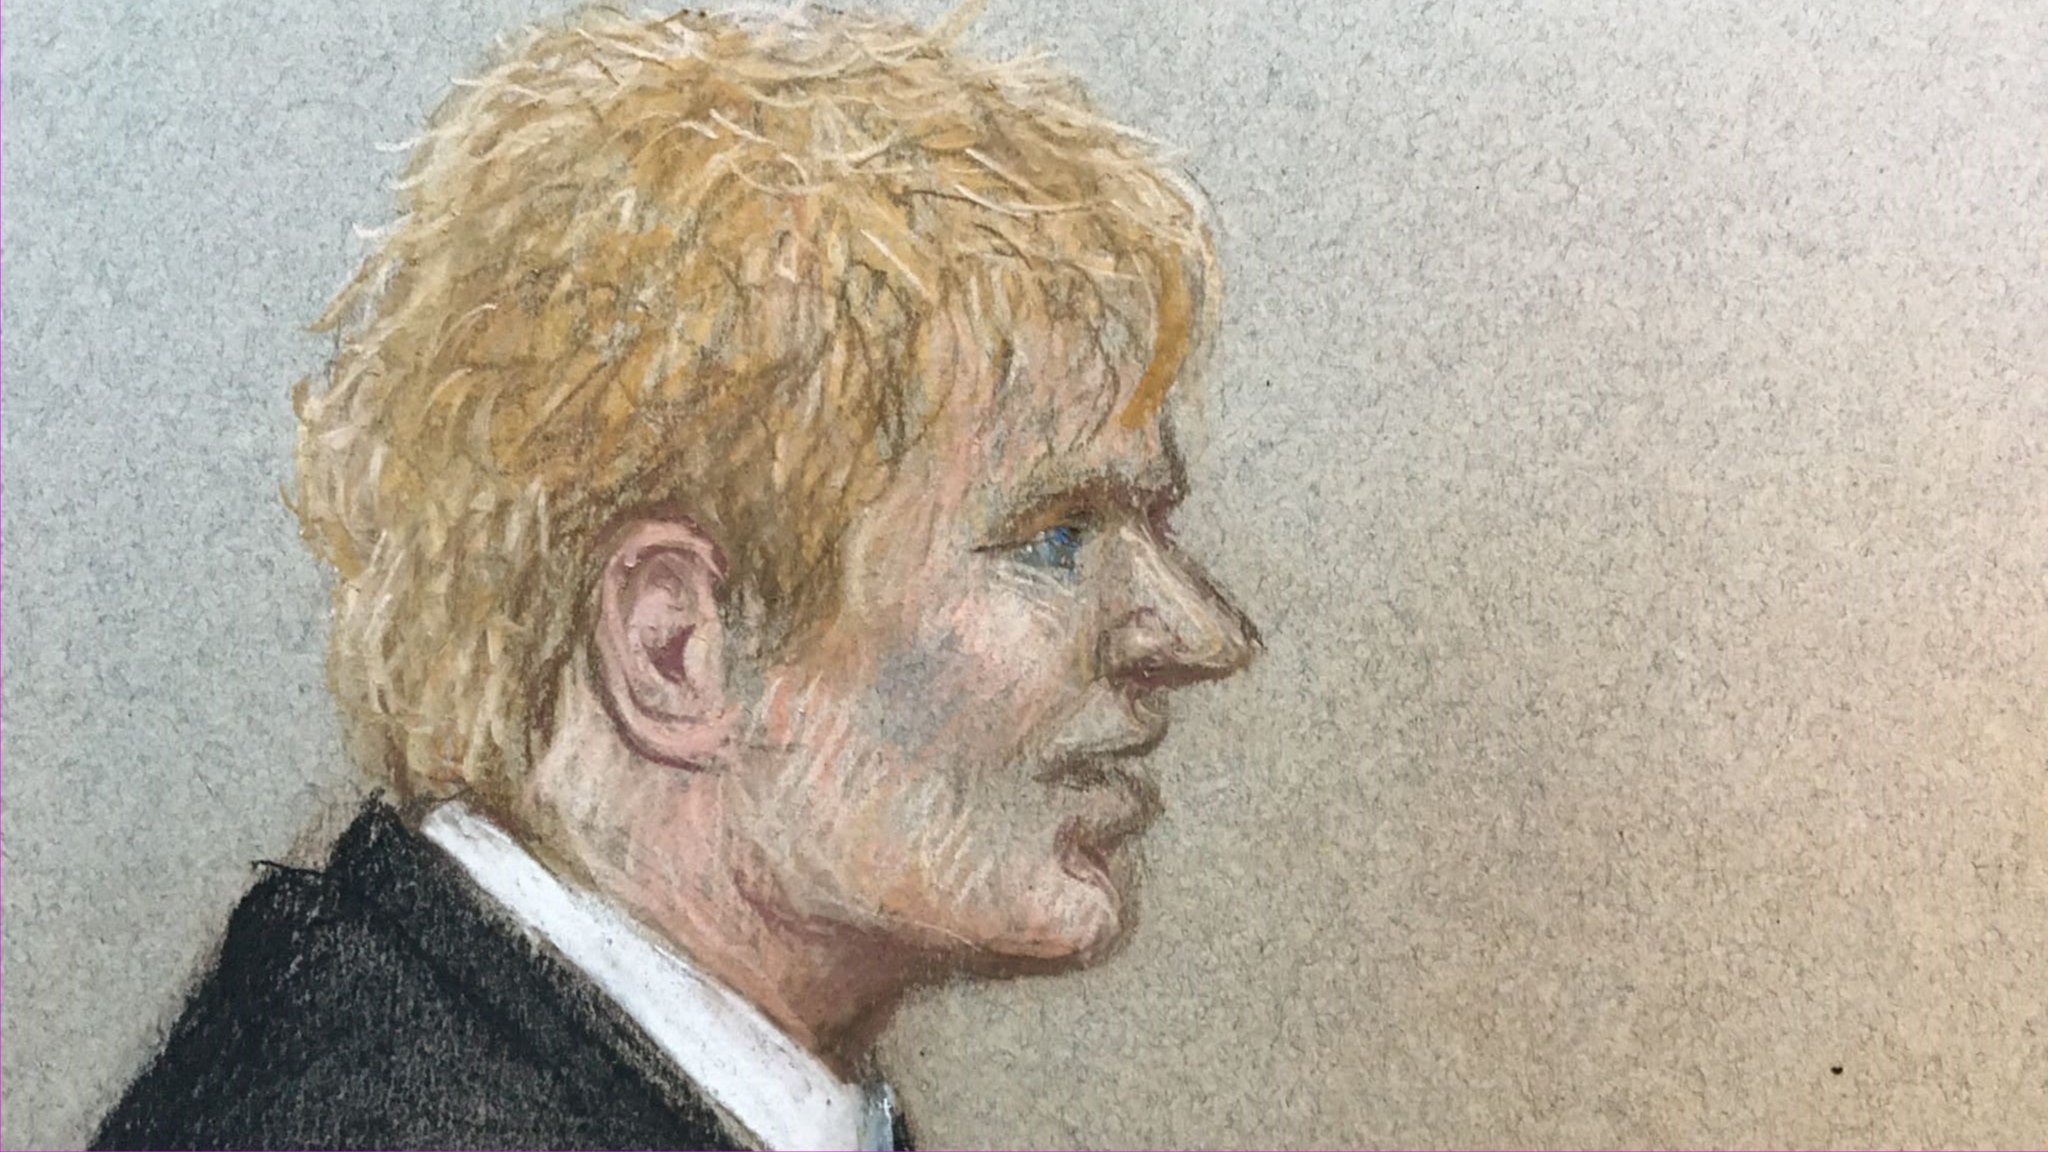 Ed Sheeran Shape Of You copyright trial What was said during two days of  stars evidence at High Court  Ents  Arts News  Sky News